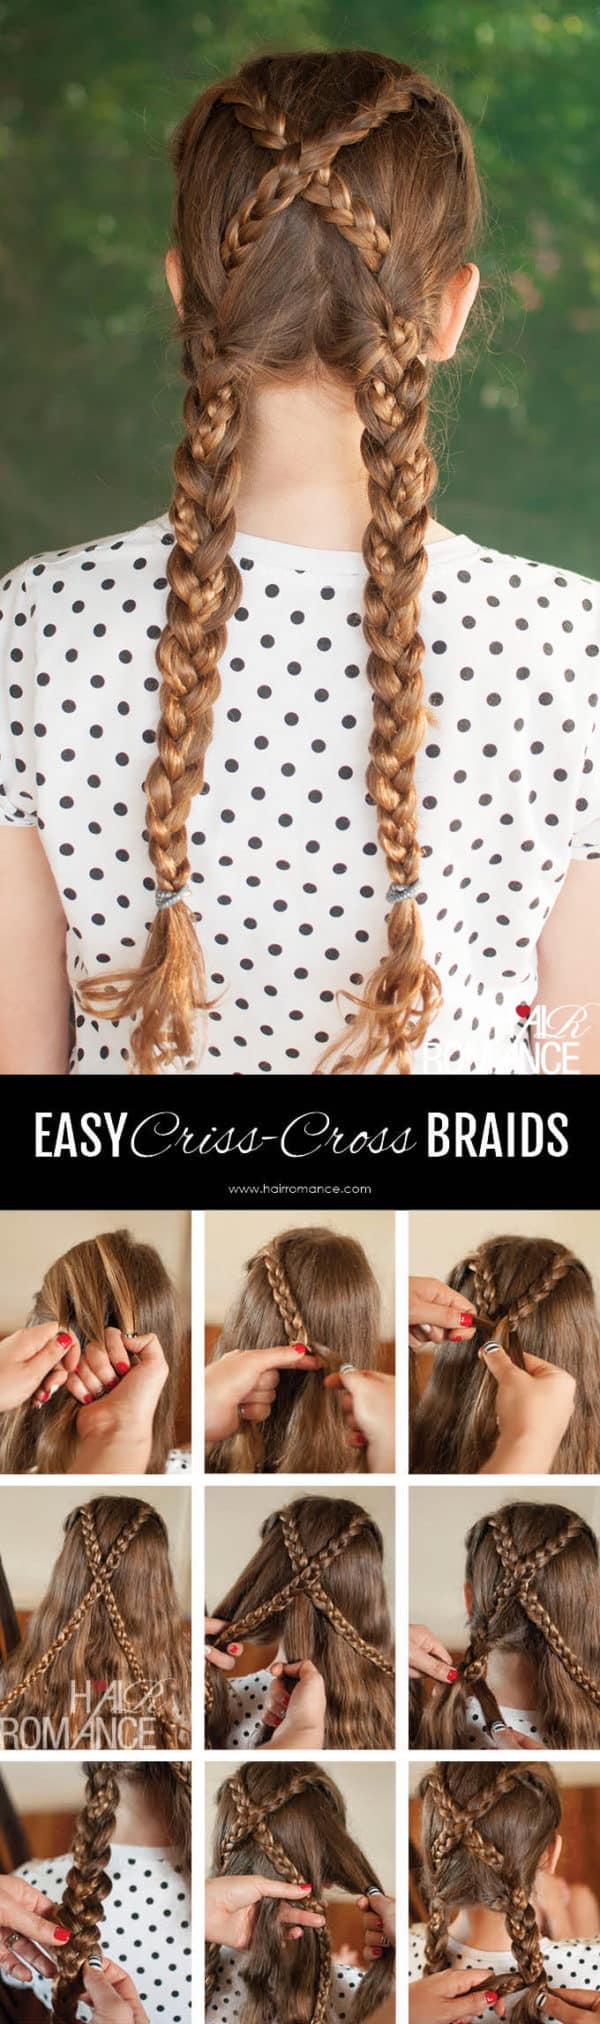 The Easiest DIY Disneys Princesses Inspired Hairstyles To Make In Less Than 10 Minutes